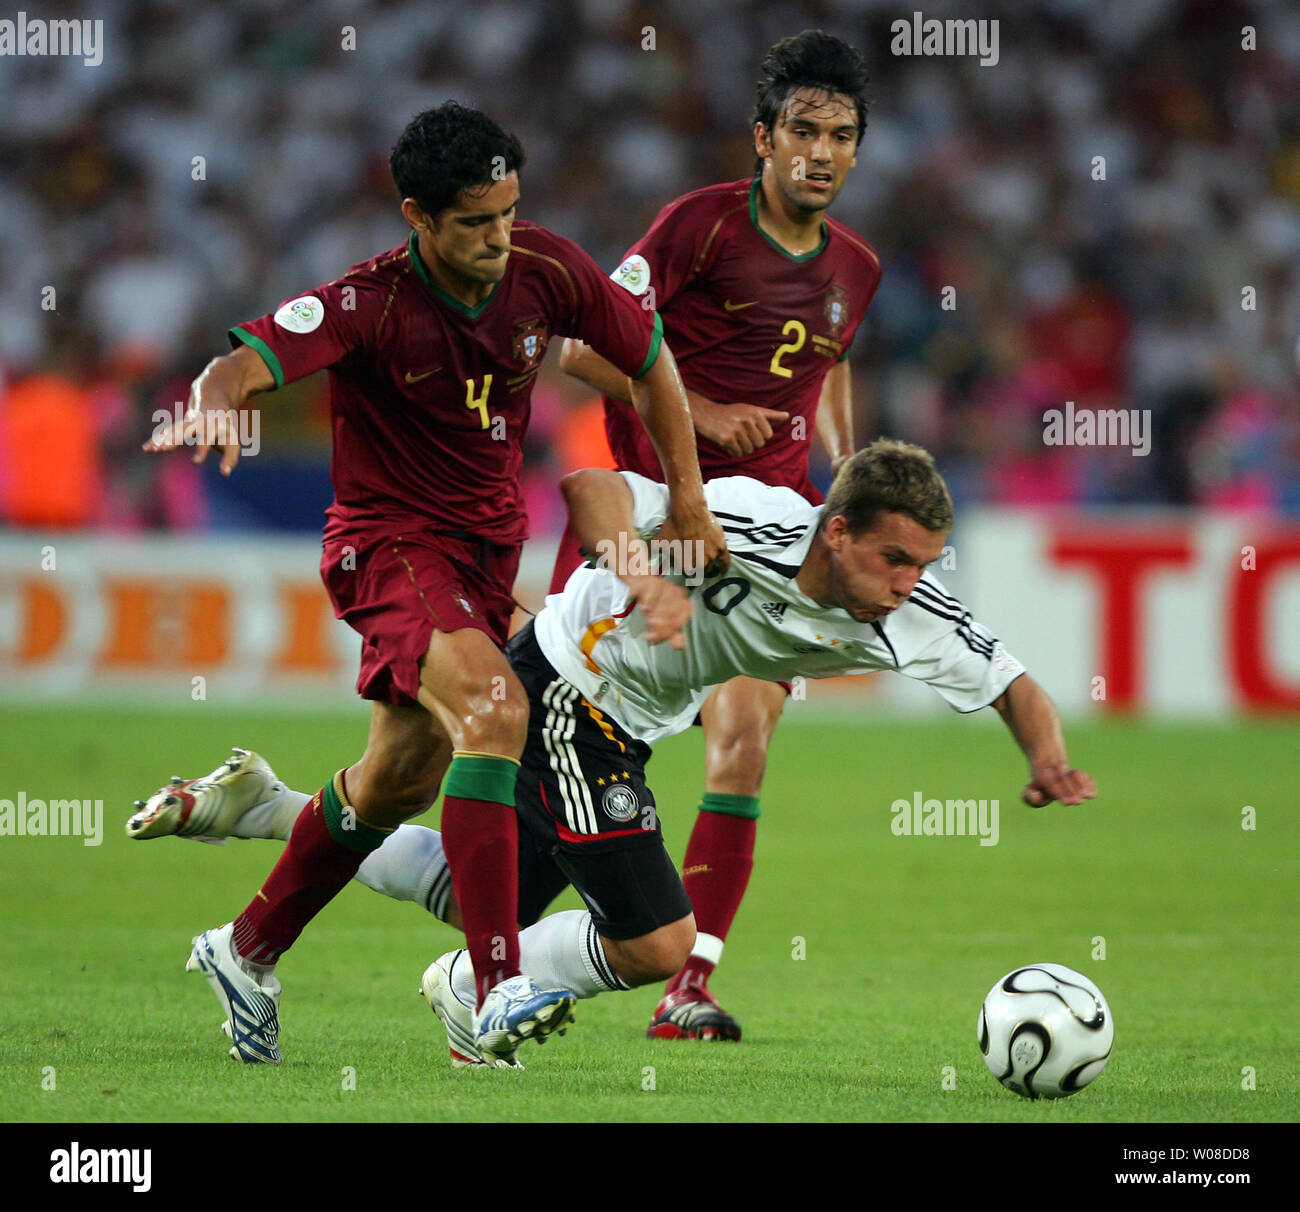 Germany's Lukas Podolski (C) is fouled by Portugal's Ricardo Costa during 2006 FIFA World Cup soccer in Stuttgart, Germany on July 8, 2006. Germany defeated Portugal 3-1 to capture third place in the World Cup.  (UPI Photo/Christian Brunskill) Stock Photo